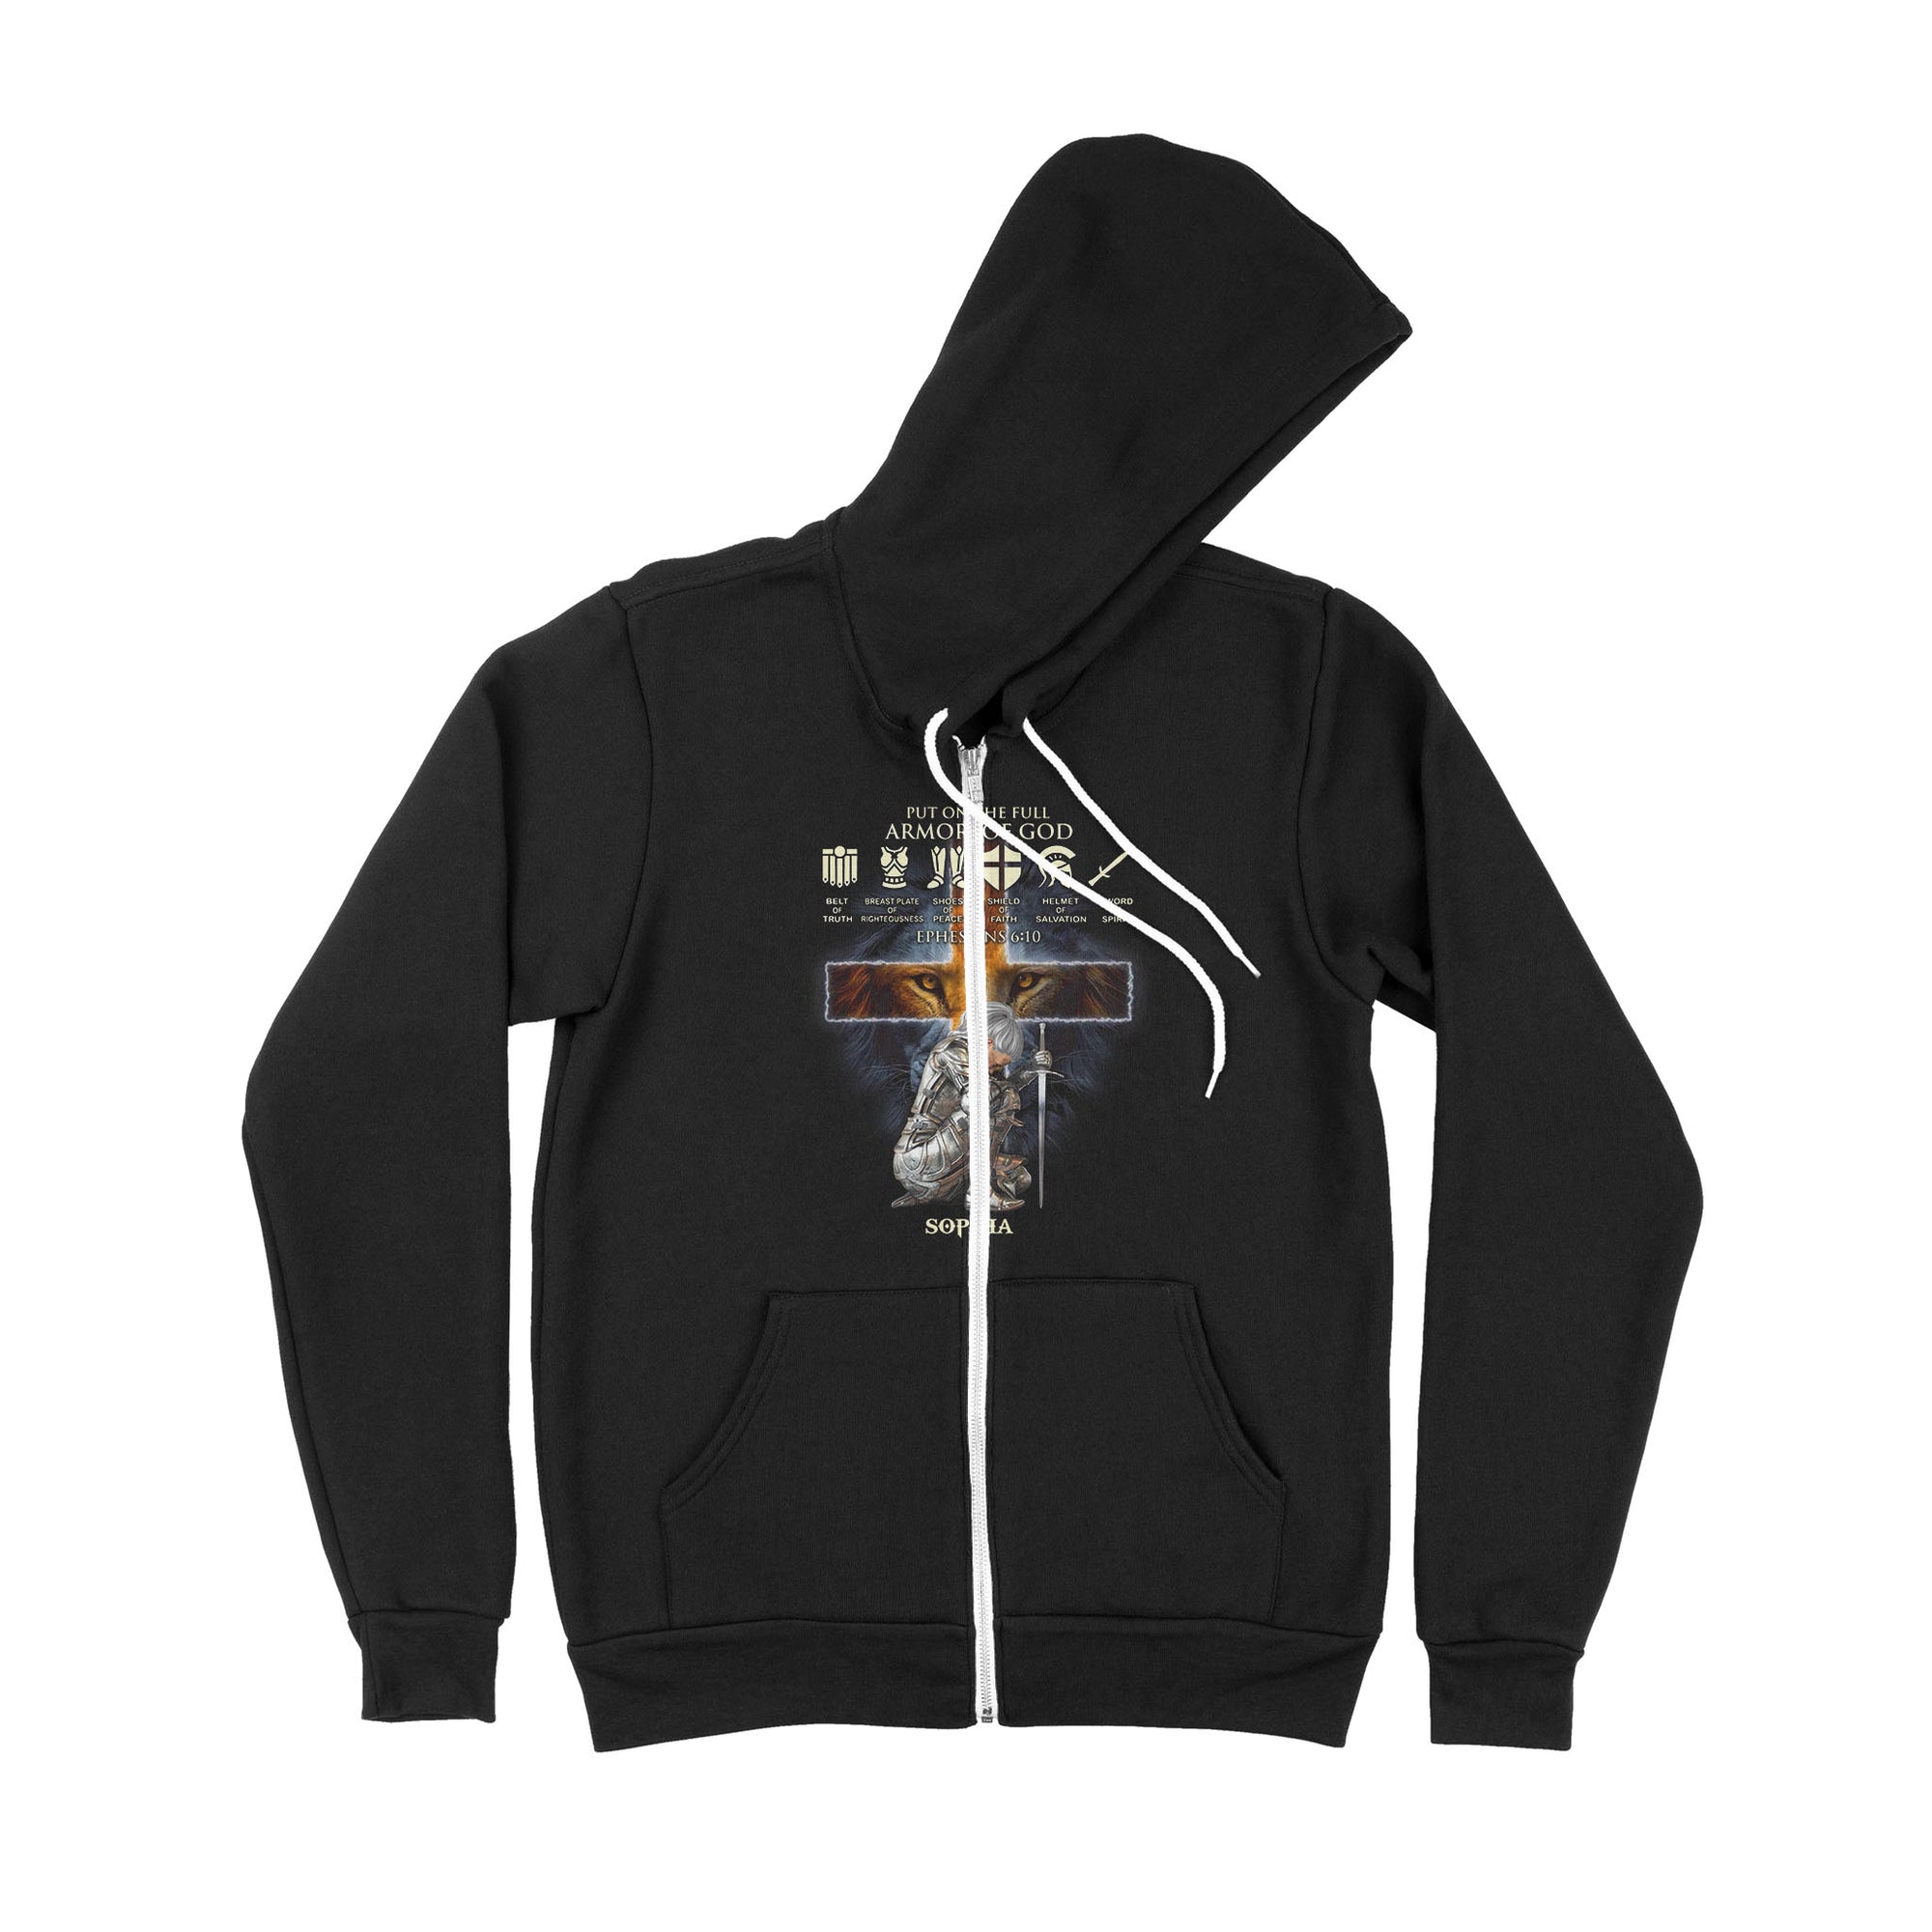 Personalized Woman Warrior Of God Put On The Full Armor Of God Ephesians 6-10 Premium Zip Hoodie